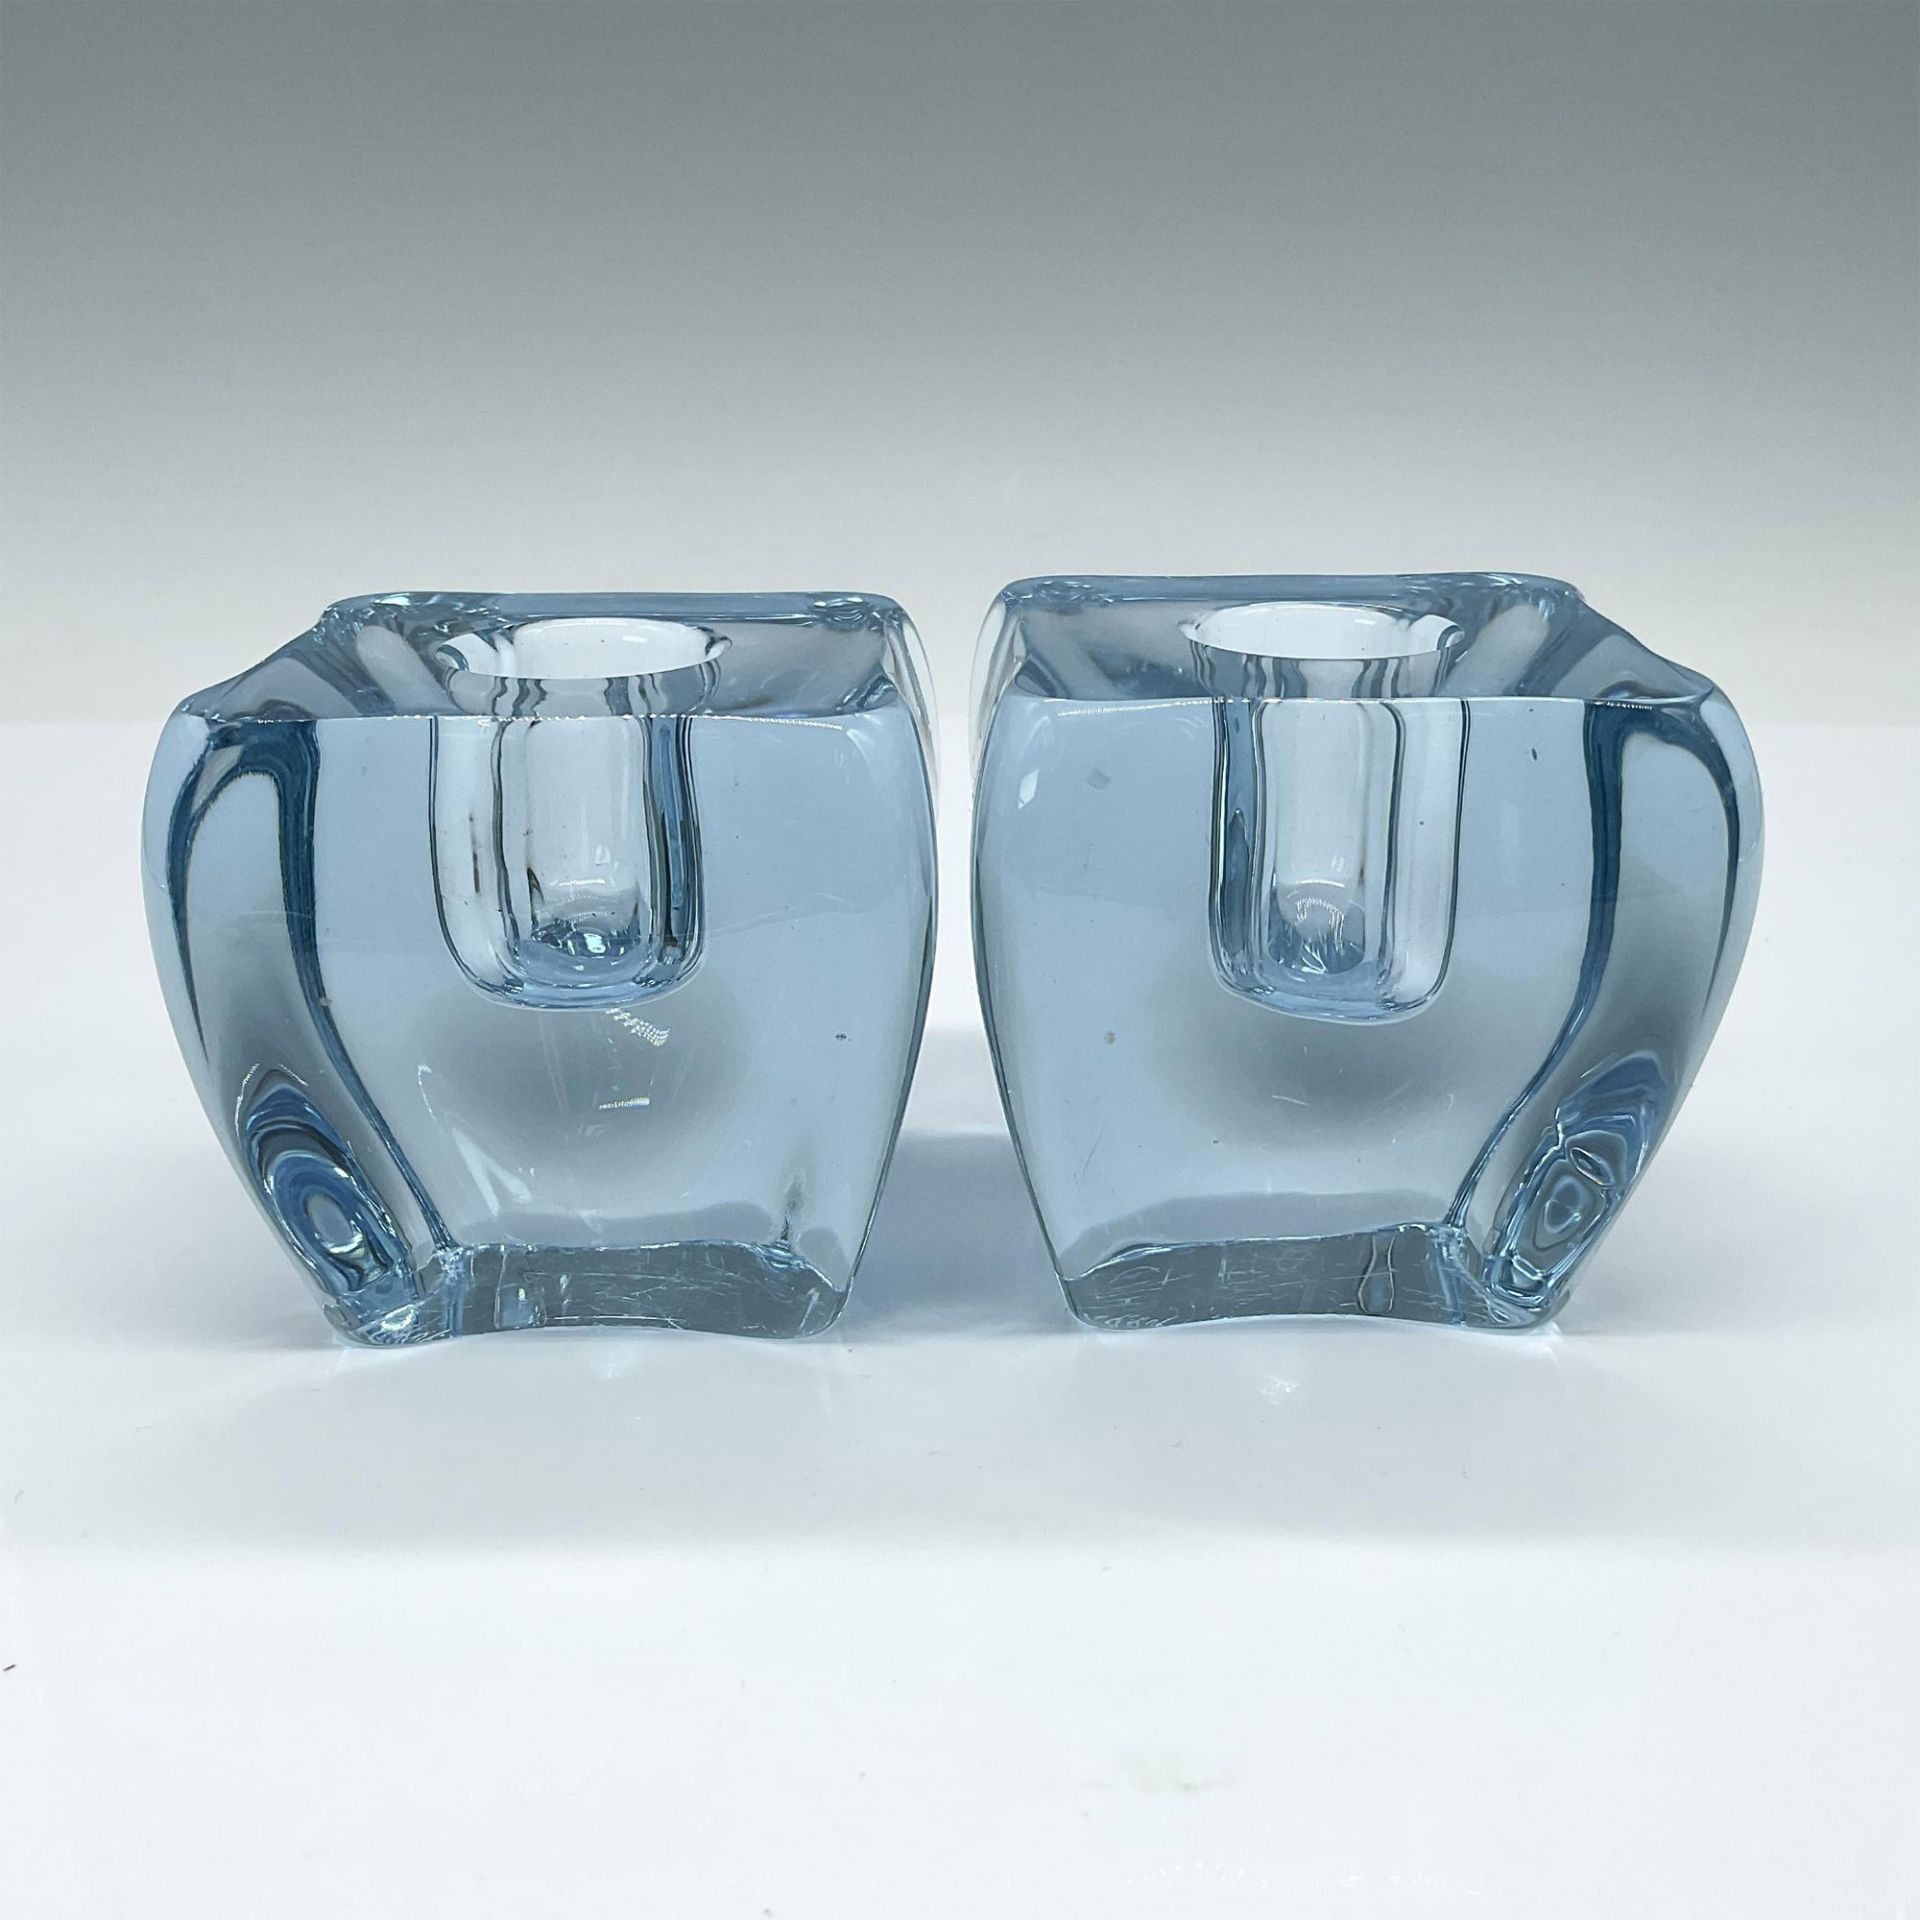 2pc Skurf Art Glass Candle Holders